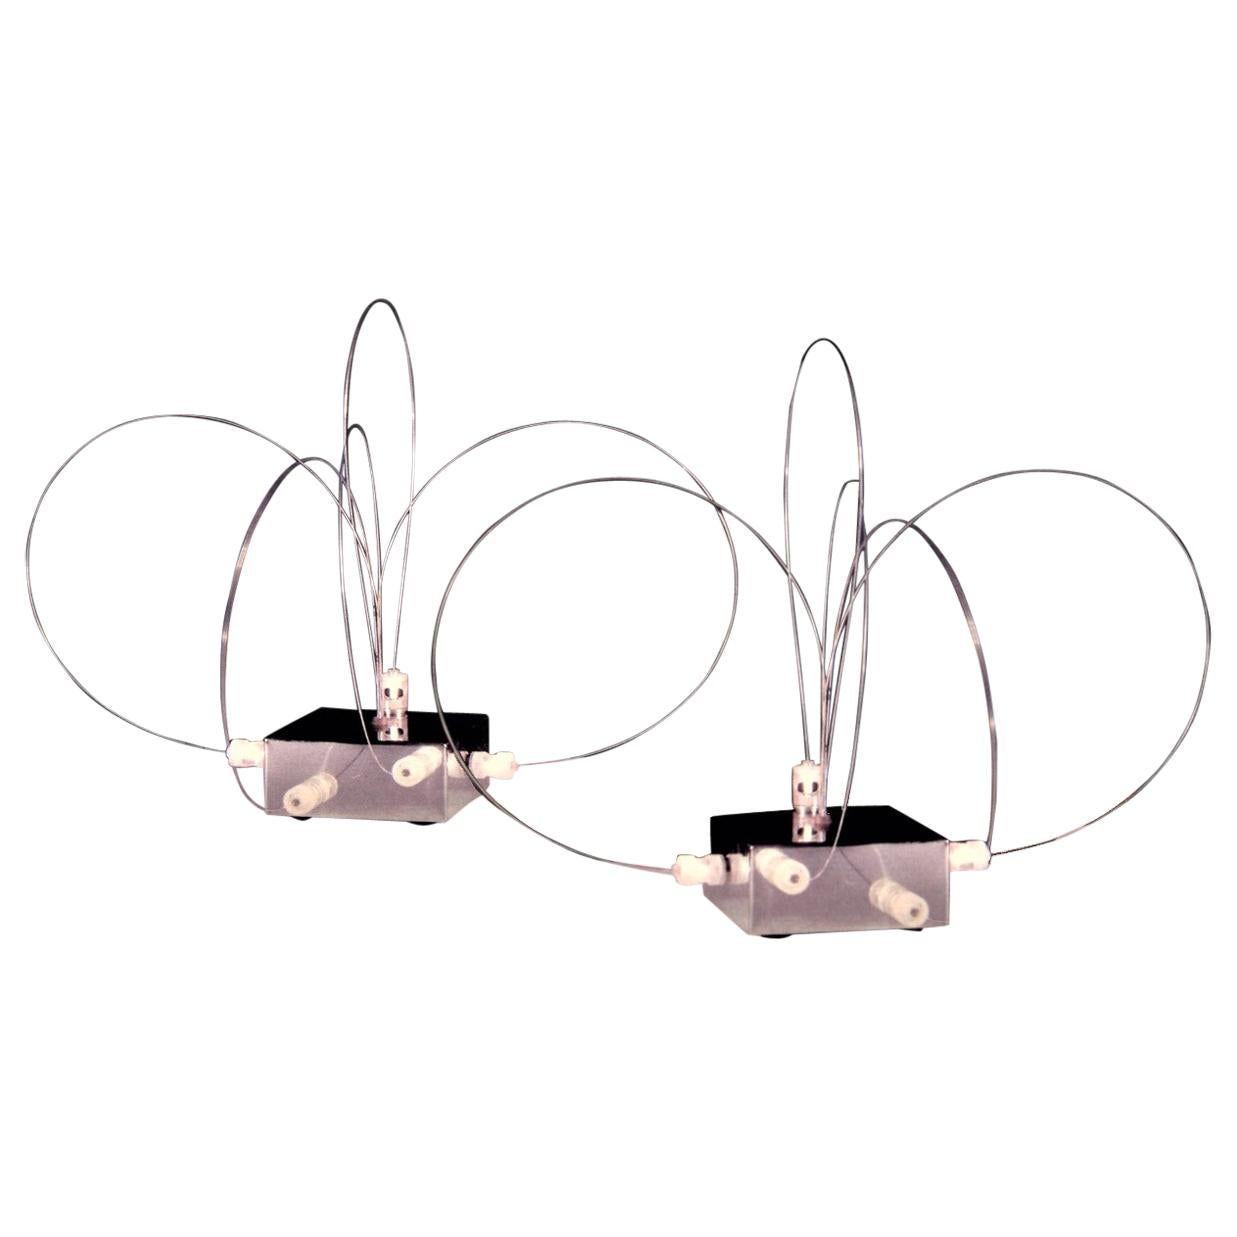 1972 Gruppo Arditi Set of 2 Table Steel Lamps, Movable Lights, by Sormani, Italy For Sale